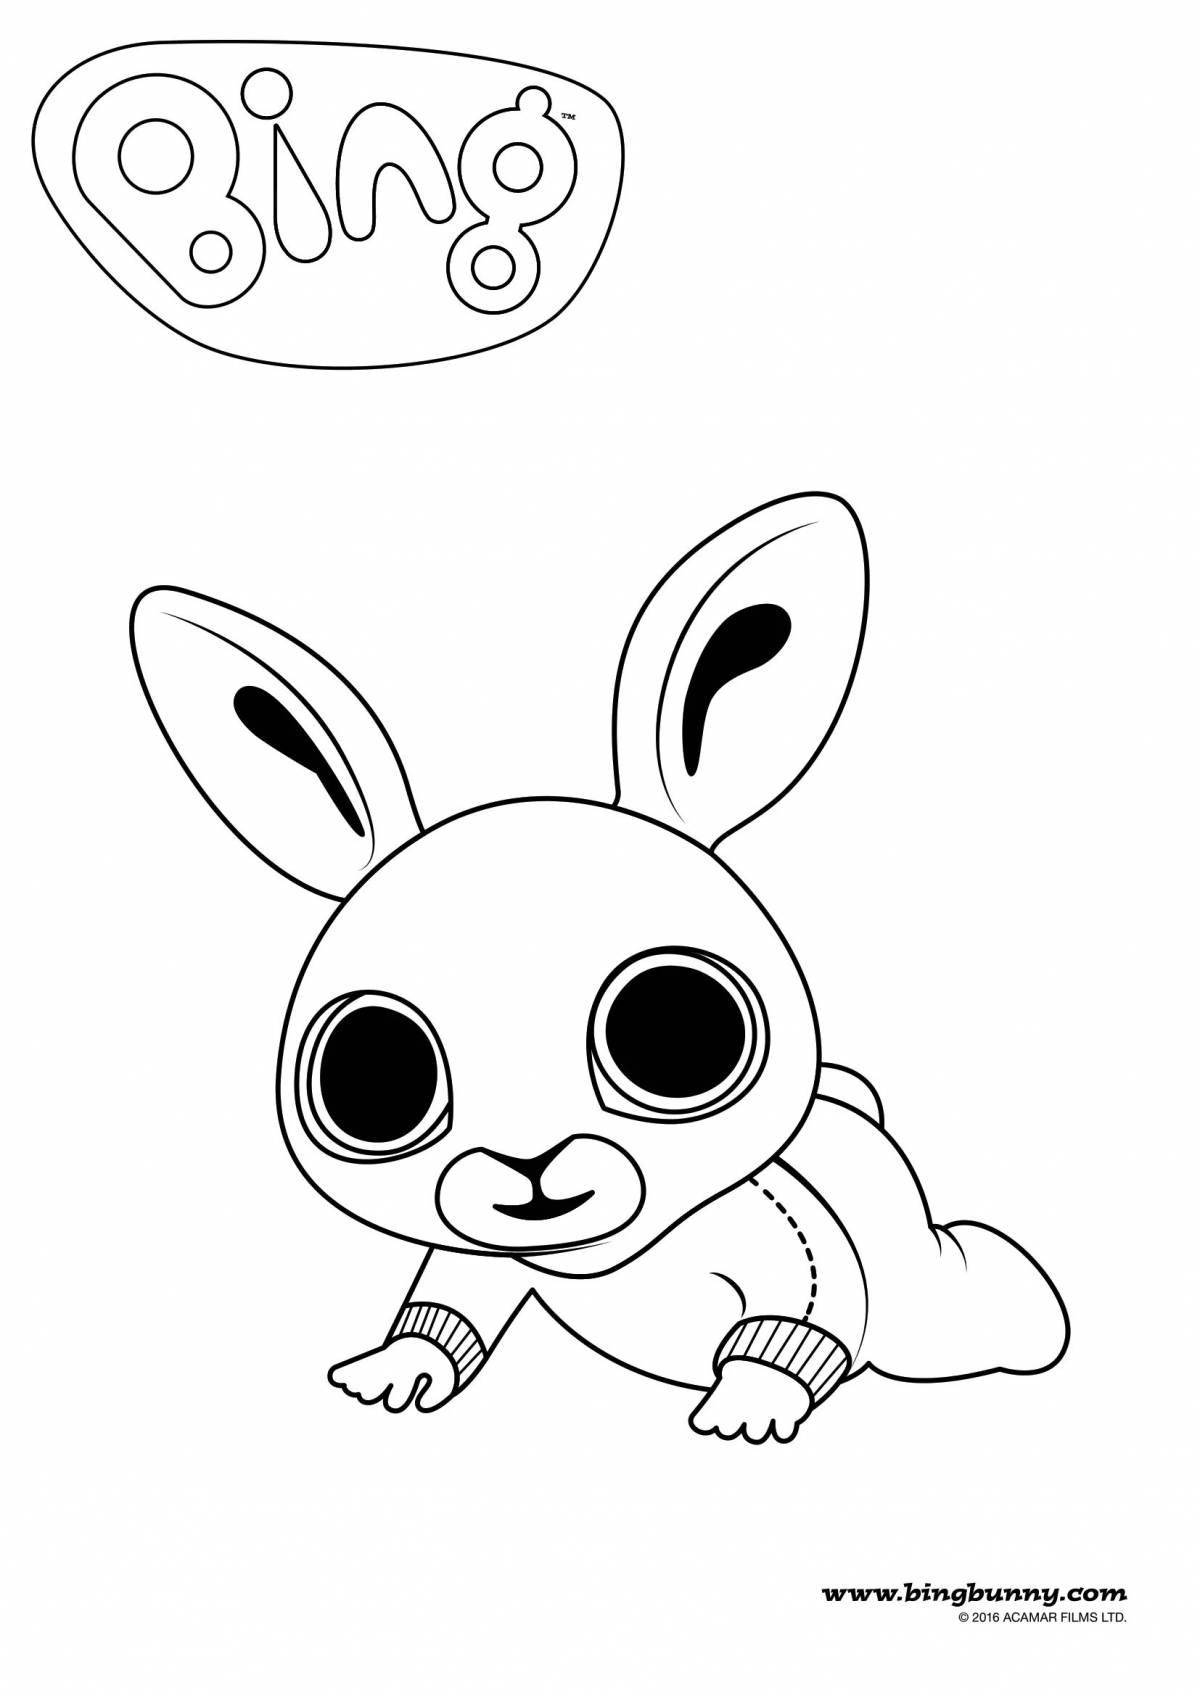 Colorful bing rabbit coloring page